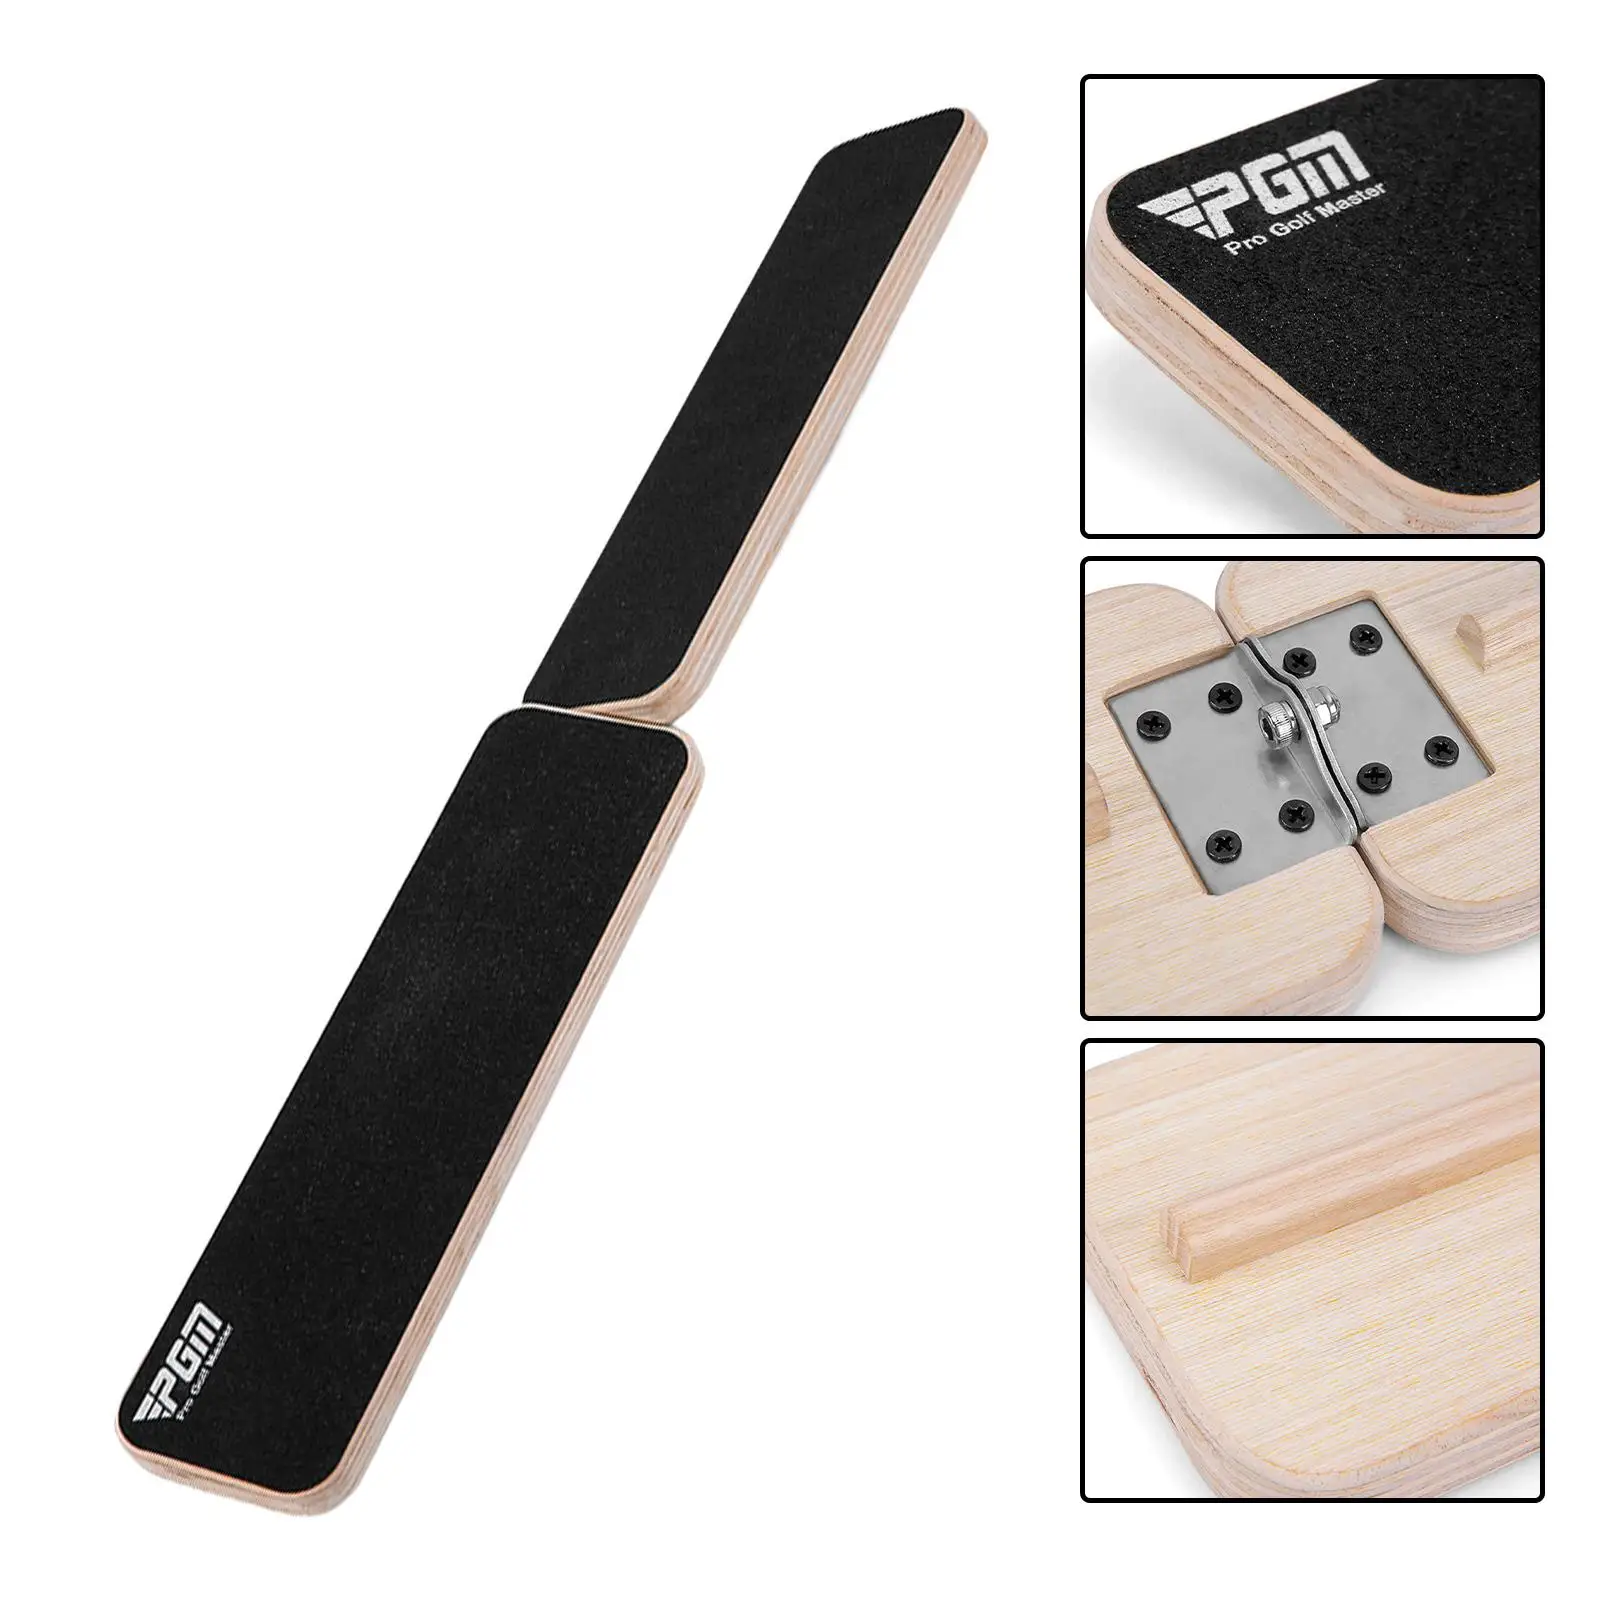 Gravity Transfer Plate Exercise Durable Alignment Correction Practice Equipment Balance and Stabilize Golf Swing Trainer Aid